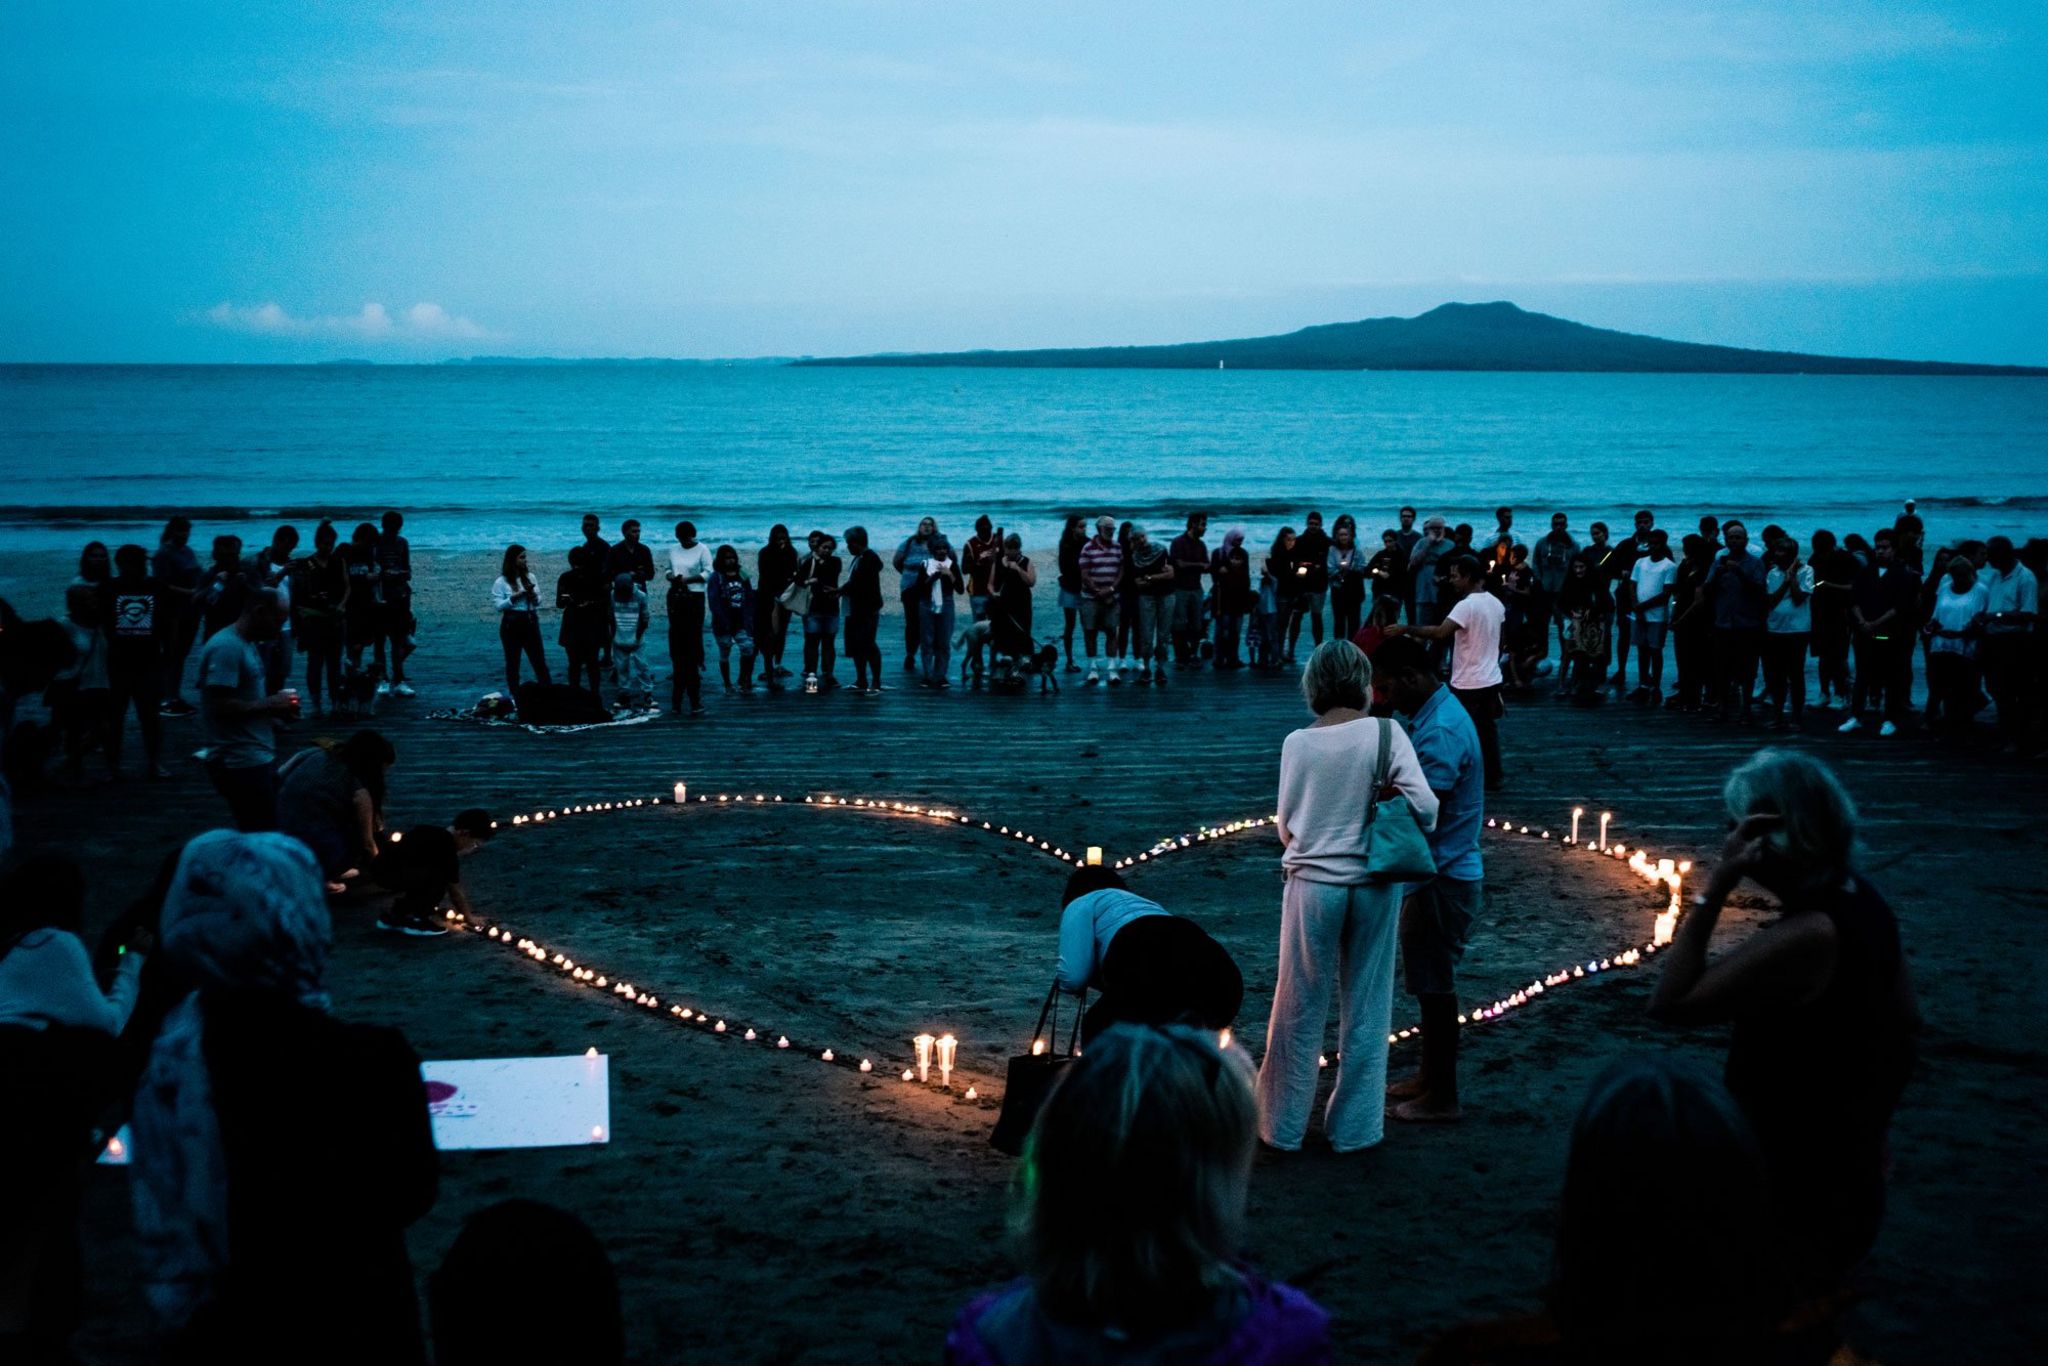 Crowds gather on Takapuna beach, for a vigil in memory of the victims of the Christchurch mosque terror attacks, New Zealand, March 2019